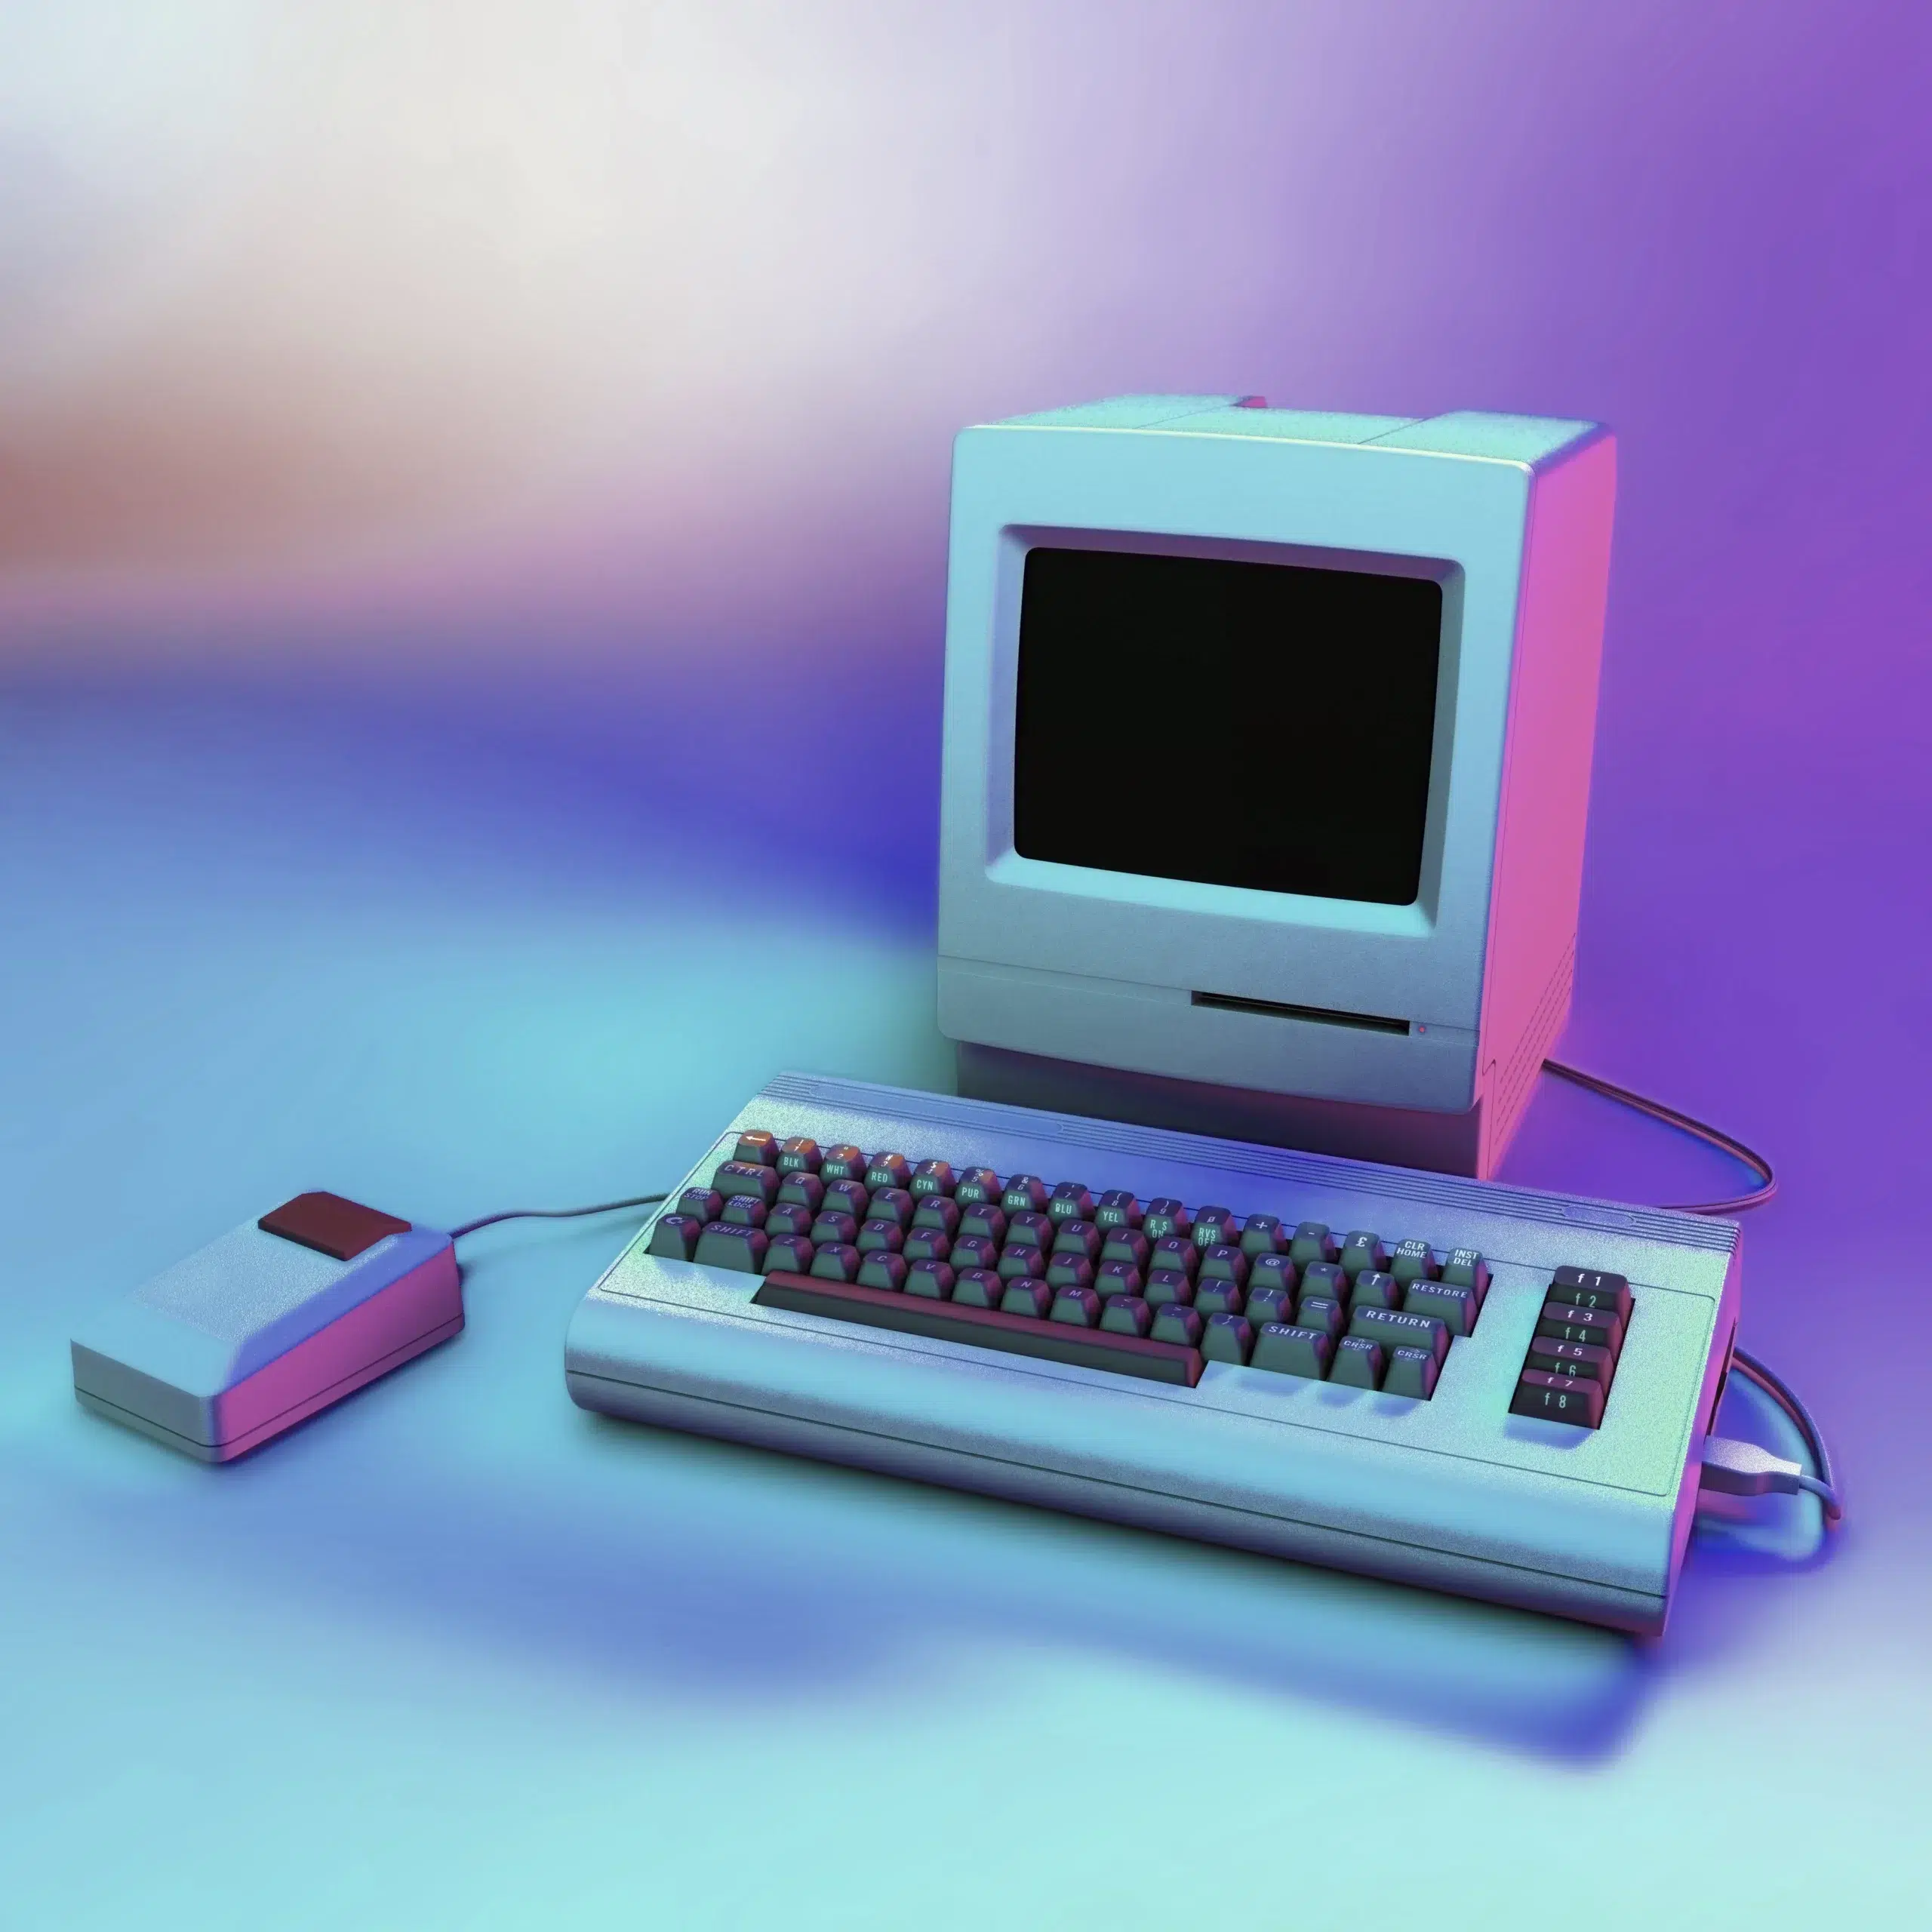 Vintage Desktop Computer with Floppy Drive, Keyboard and Mouse in Neon Lightning. 3D Rendering of Retro PC with Empty Screen.